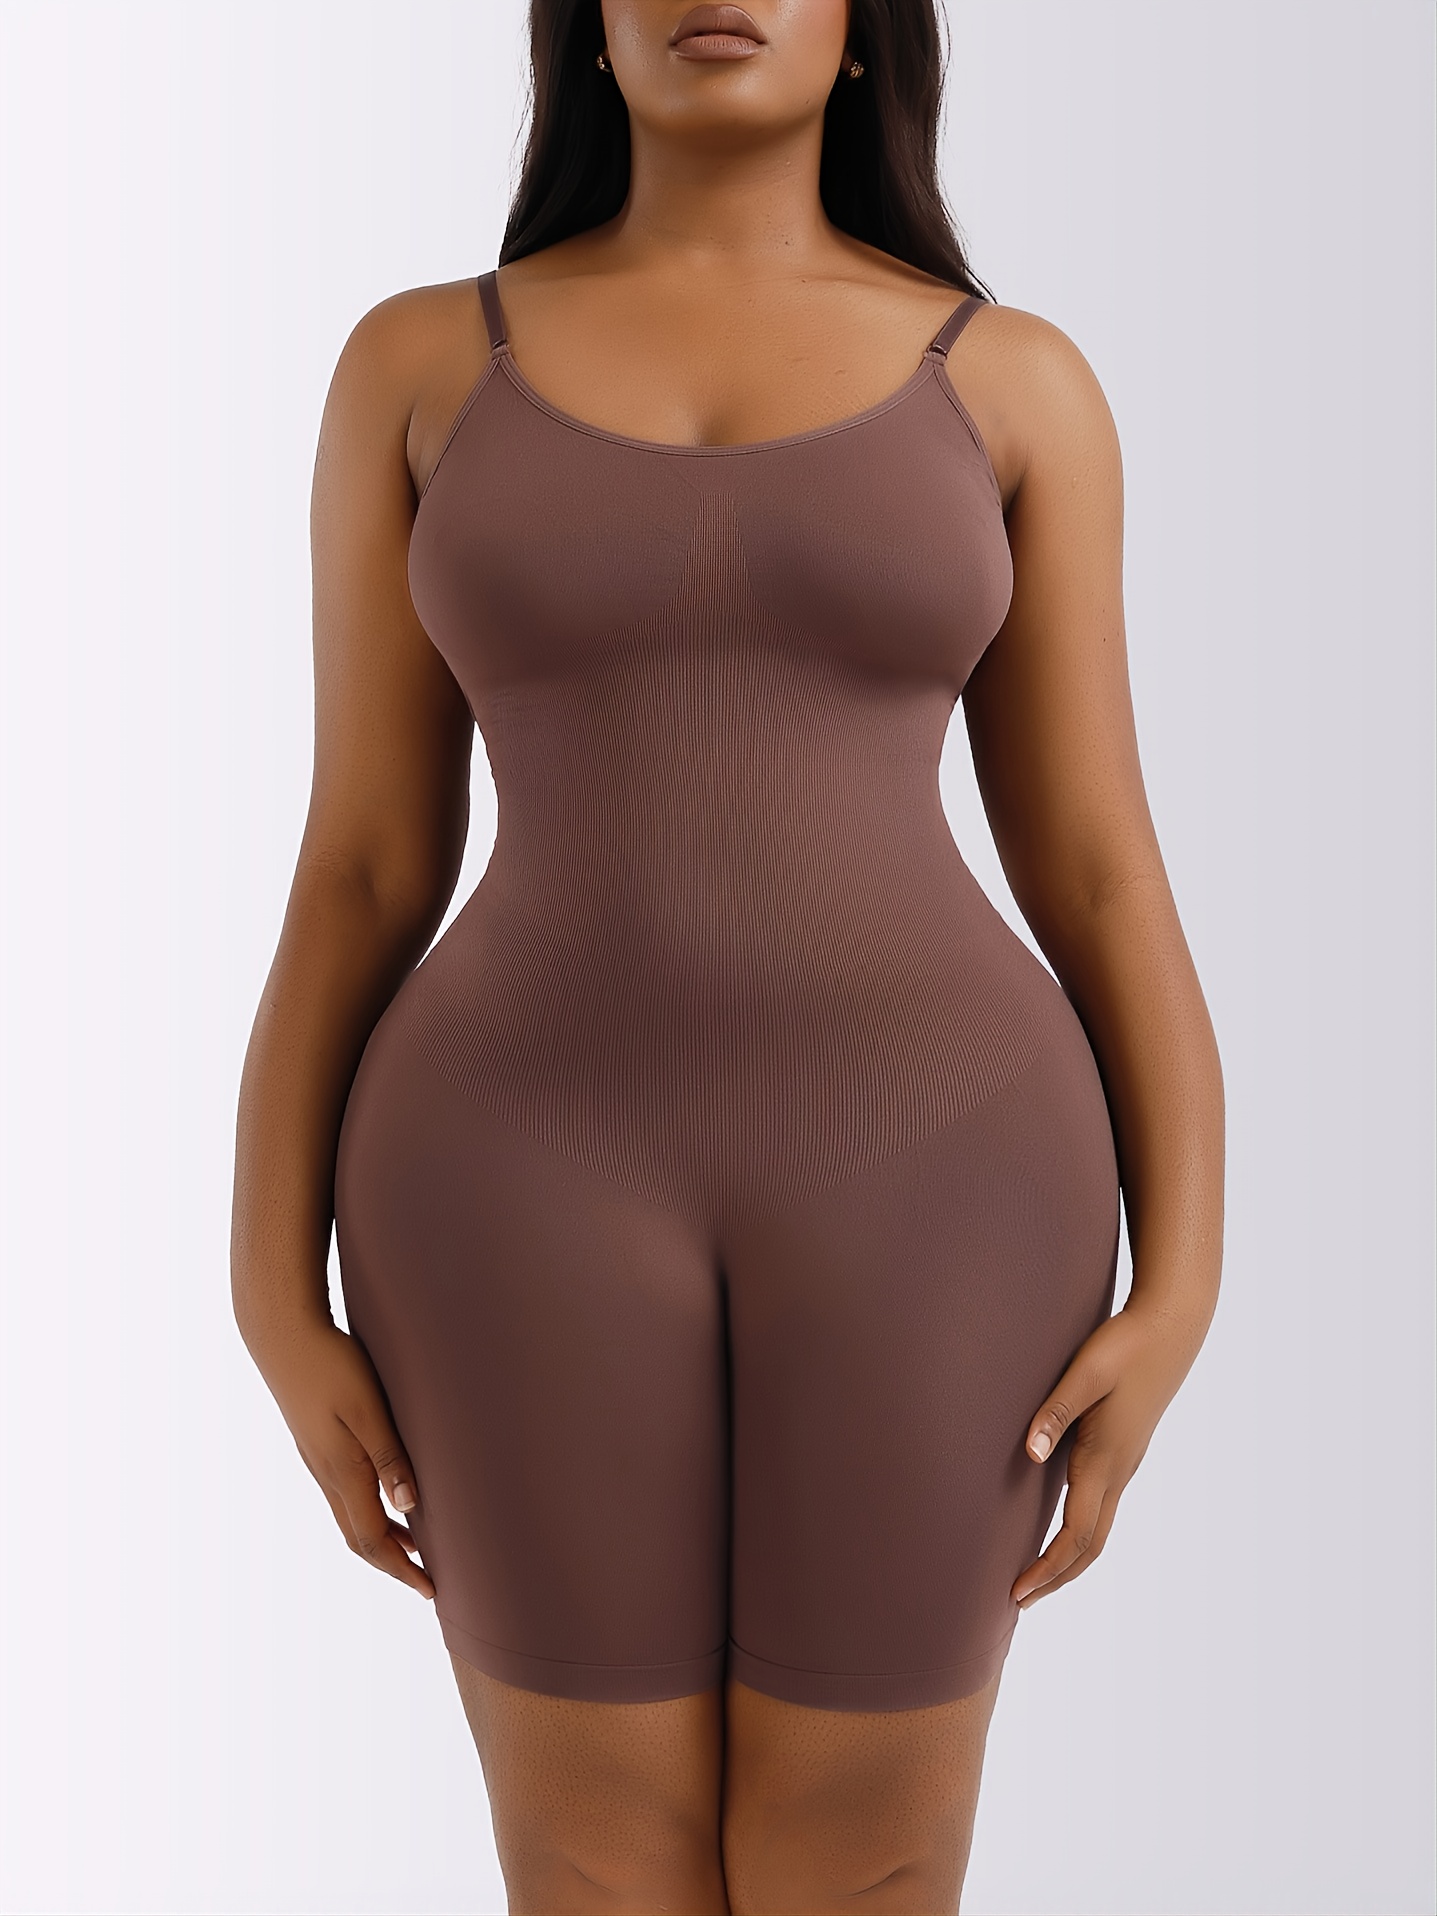 Sexy Clothes for Women Ladies Seamless One-Piece Body Shaper